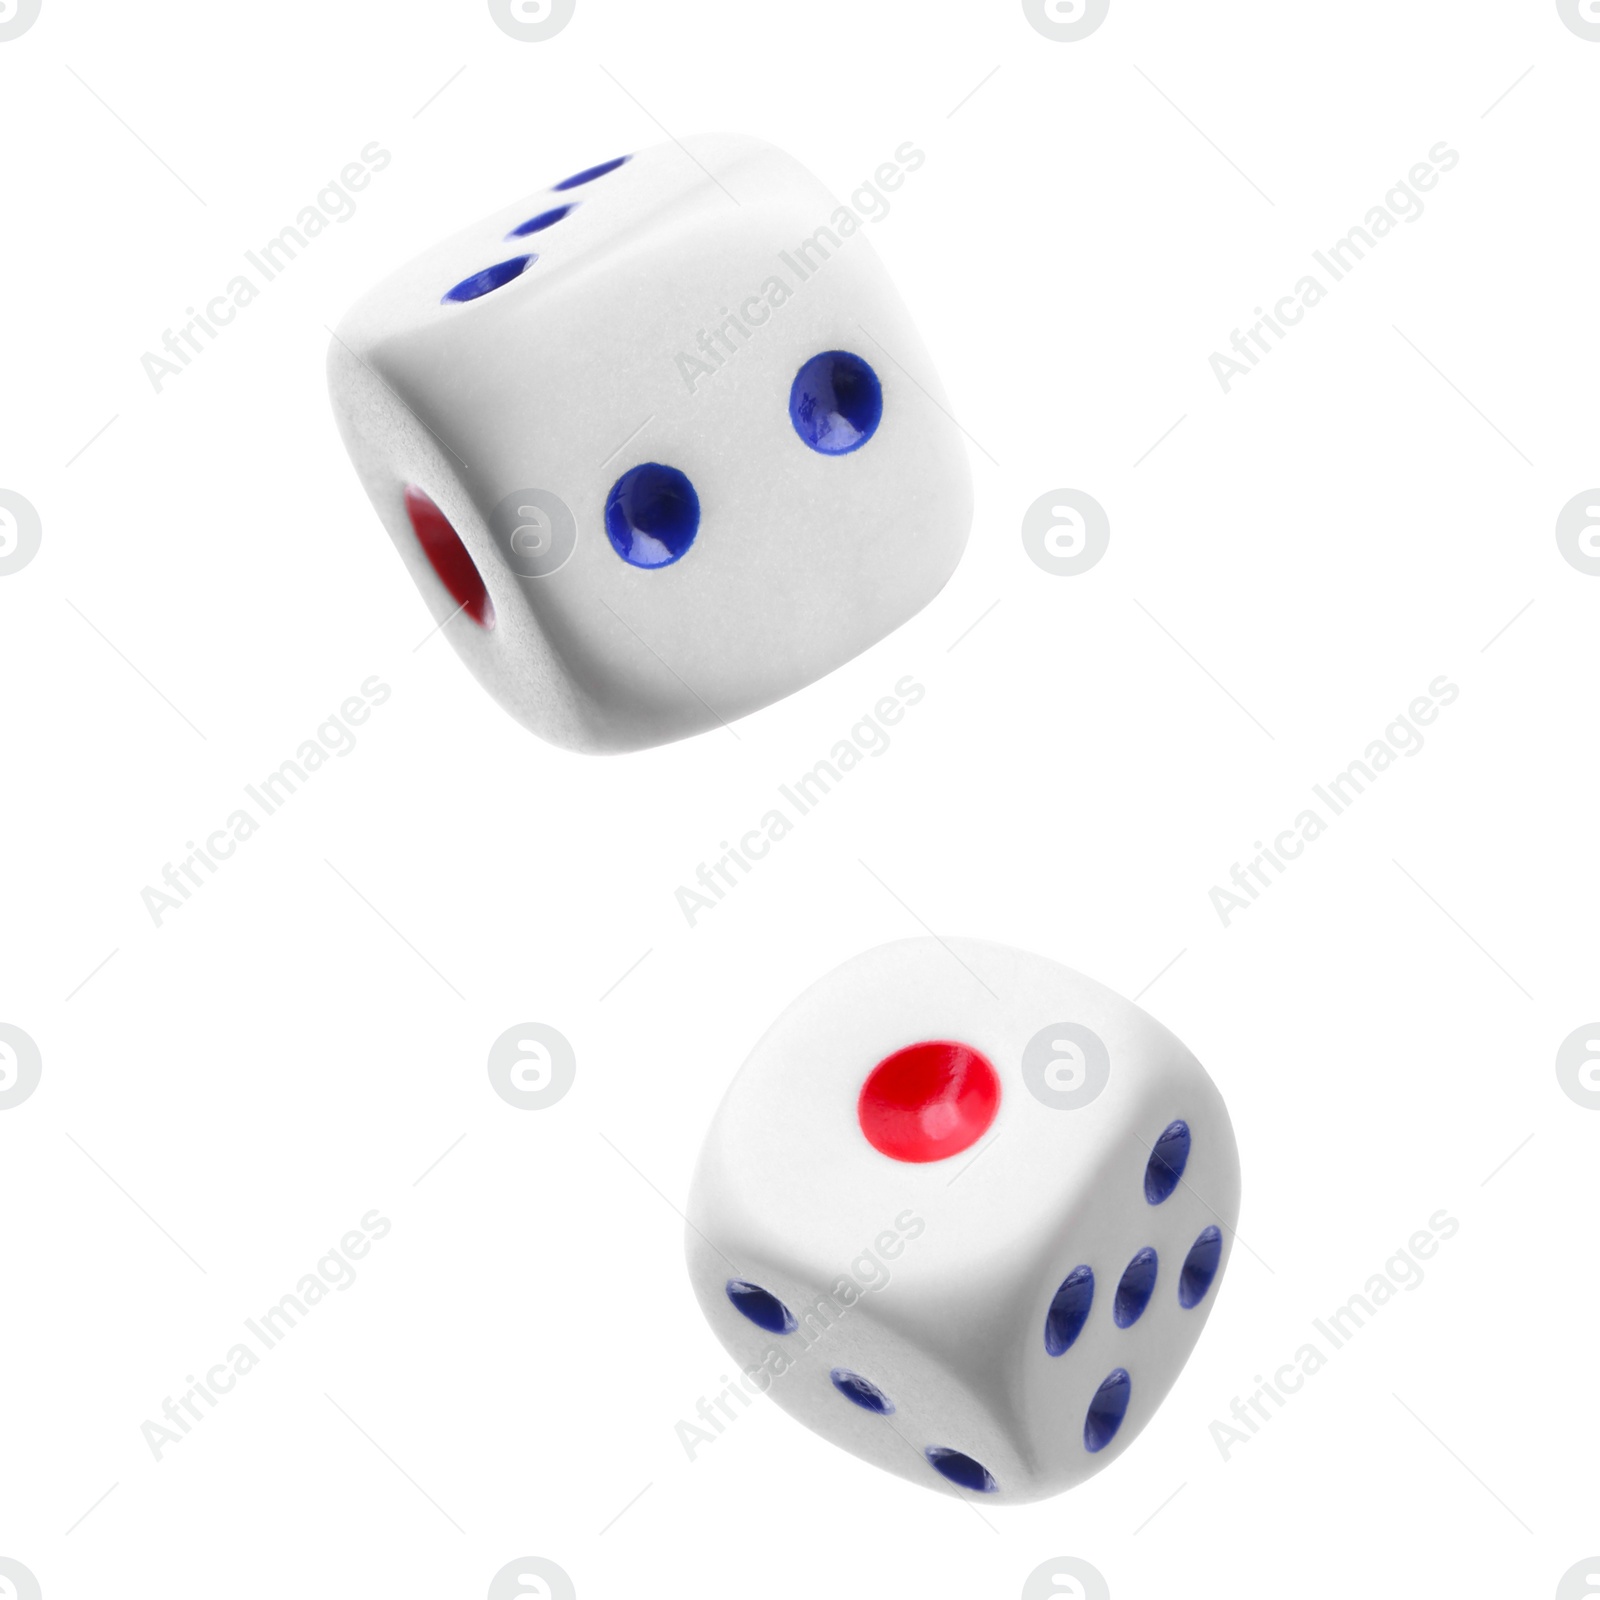 Image of Two dice in air on white background